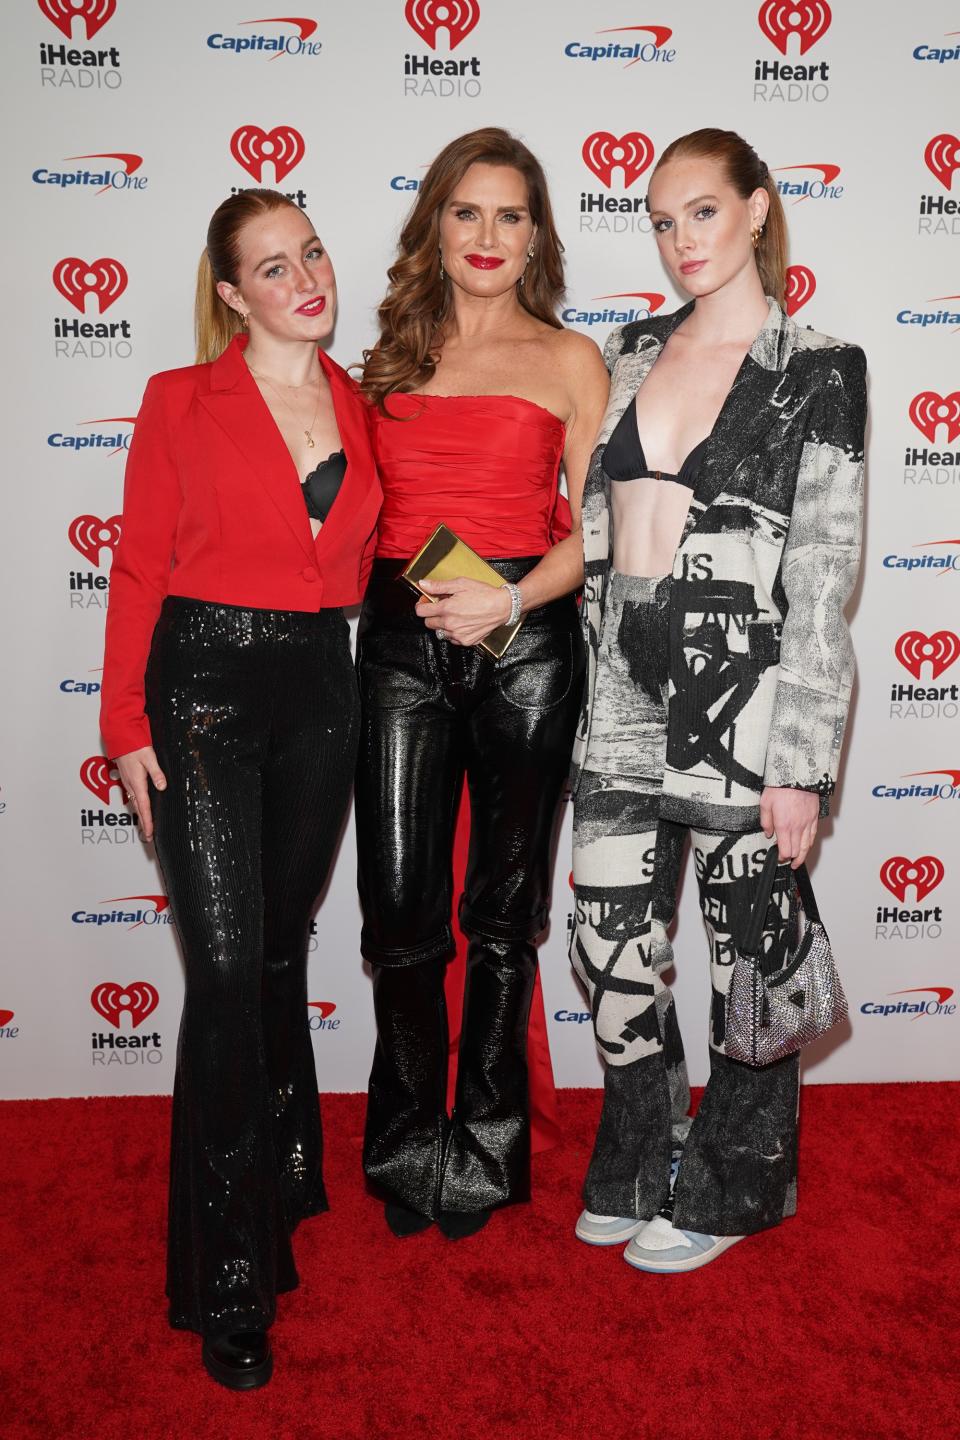 Rowan Henchy , Brooke Shields, Grier Henchy in attendance for Z100''s iHeartRadio Jingle Ball Presented by Capital One - Part 2, Madison Square Garden, New York, NY December 9, 2022. Photo By: Kristin Callahan/Everett Collection